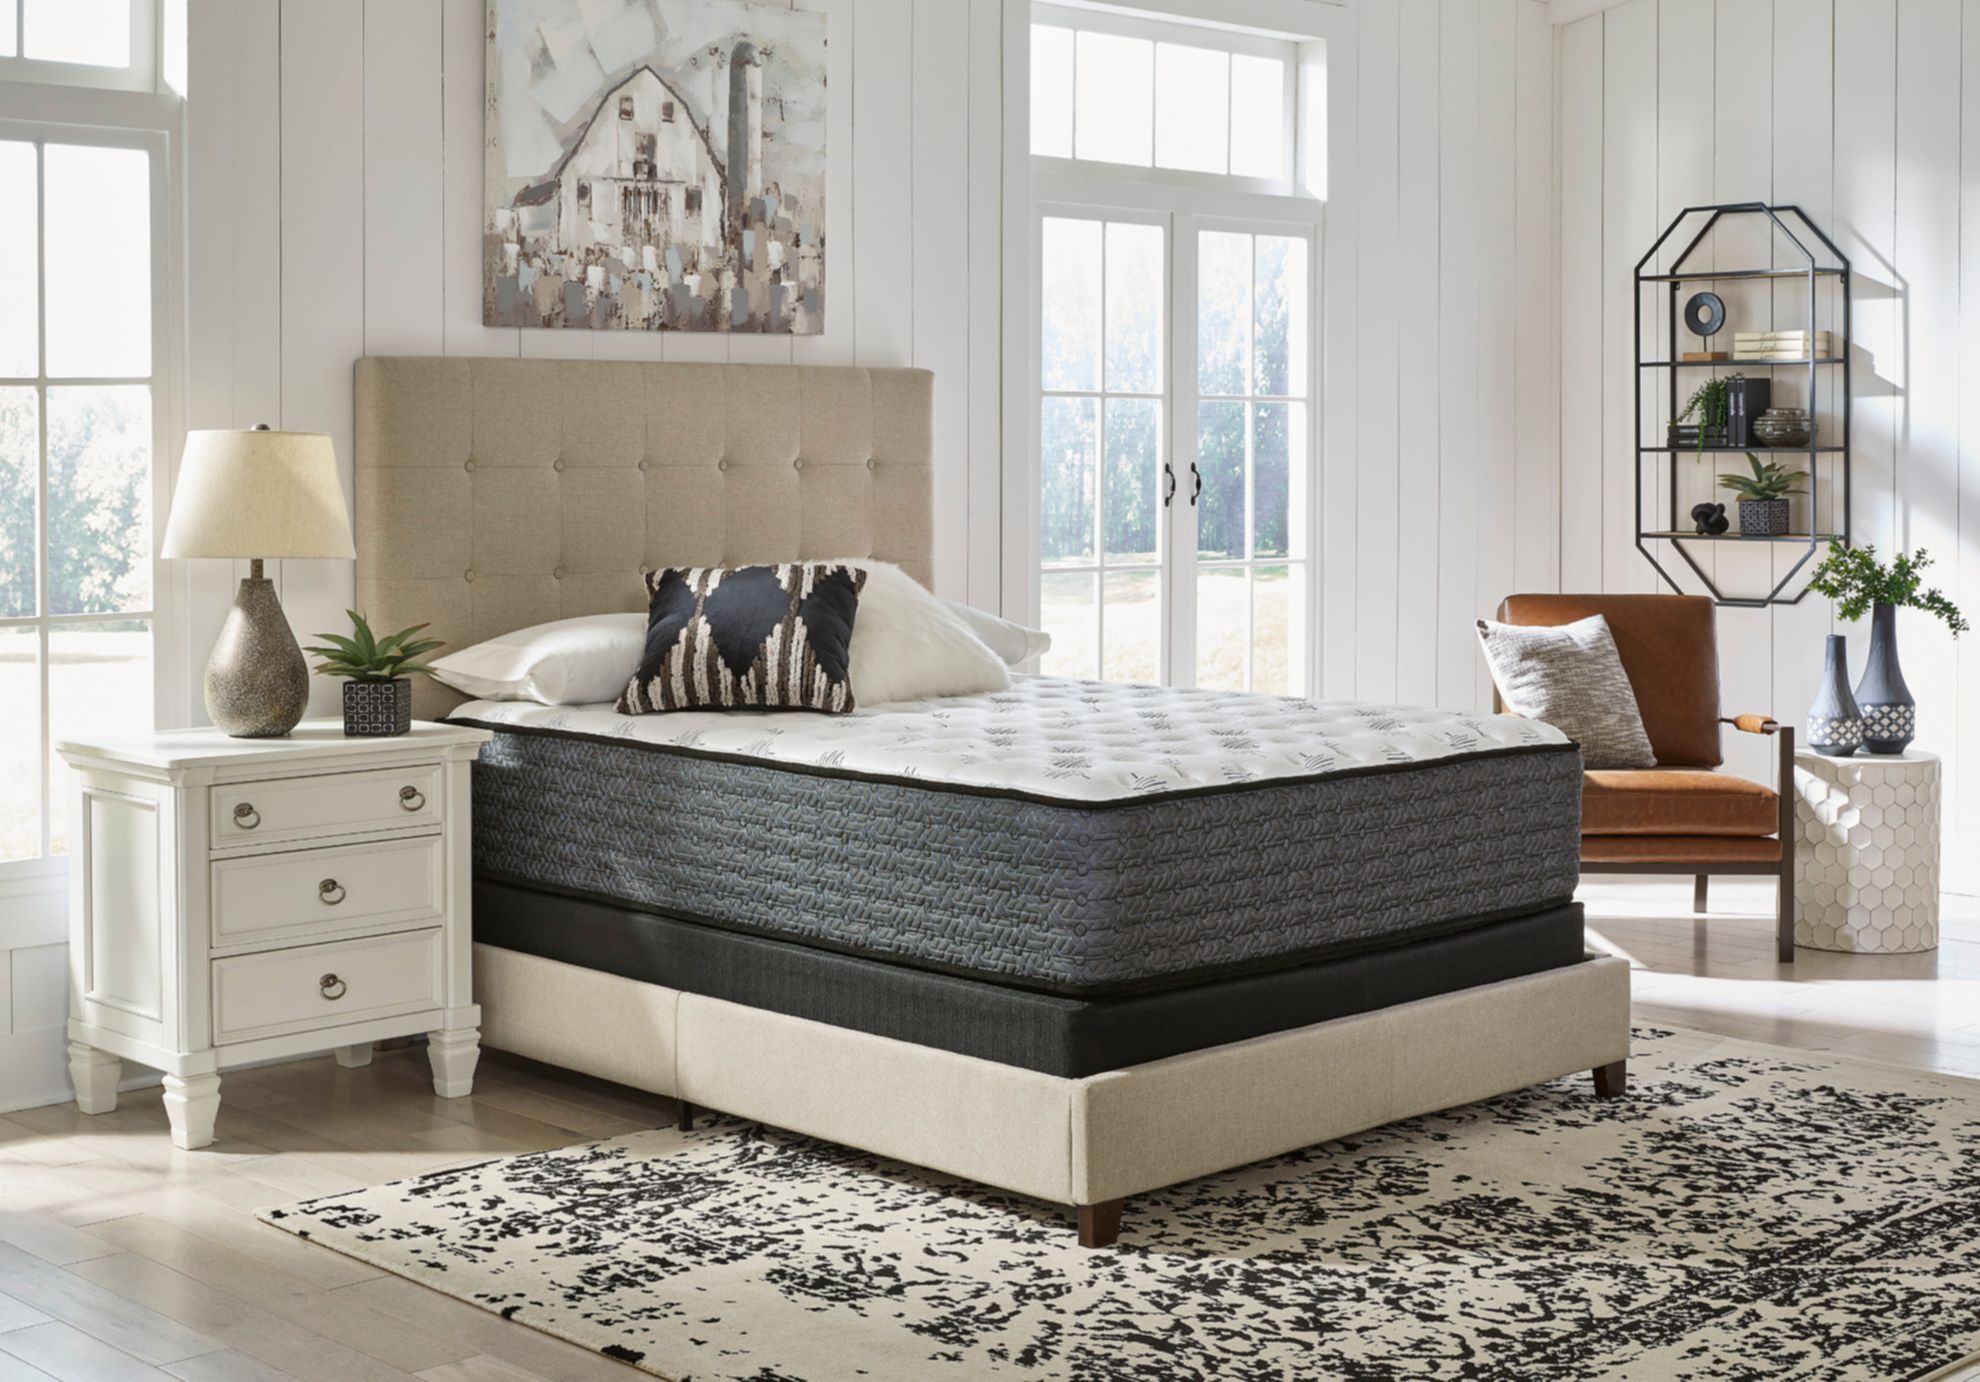 Picture of Pinnacle Firm Tight Top King Mattress